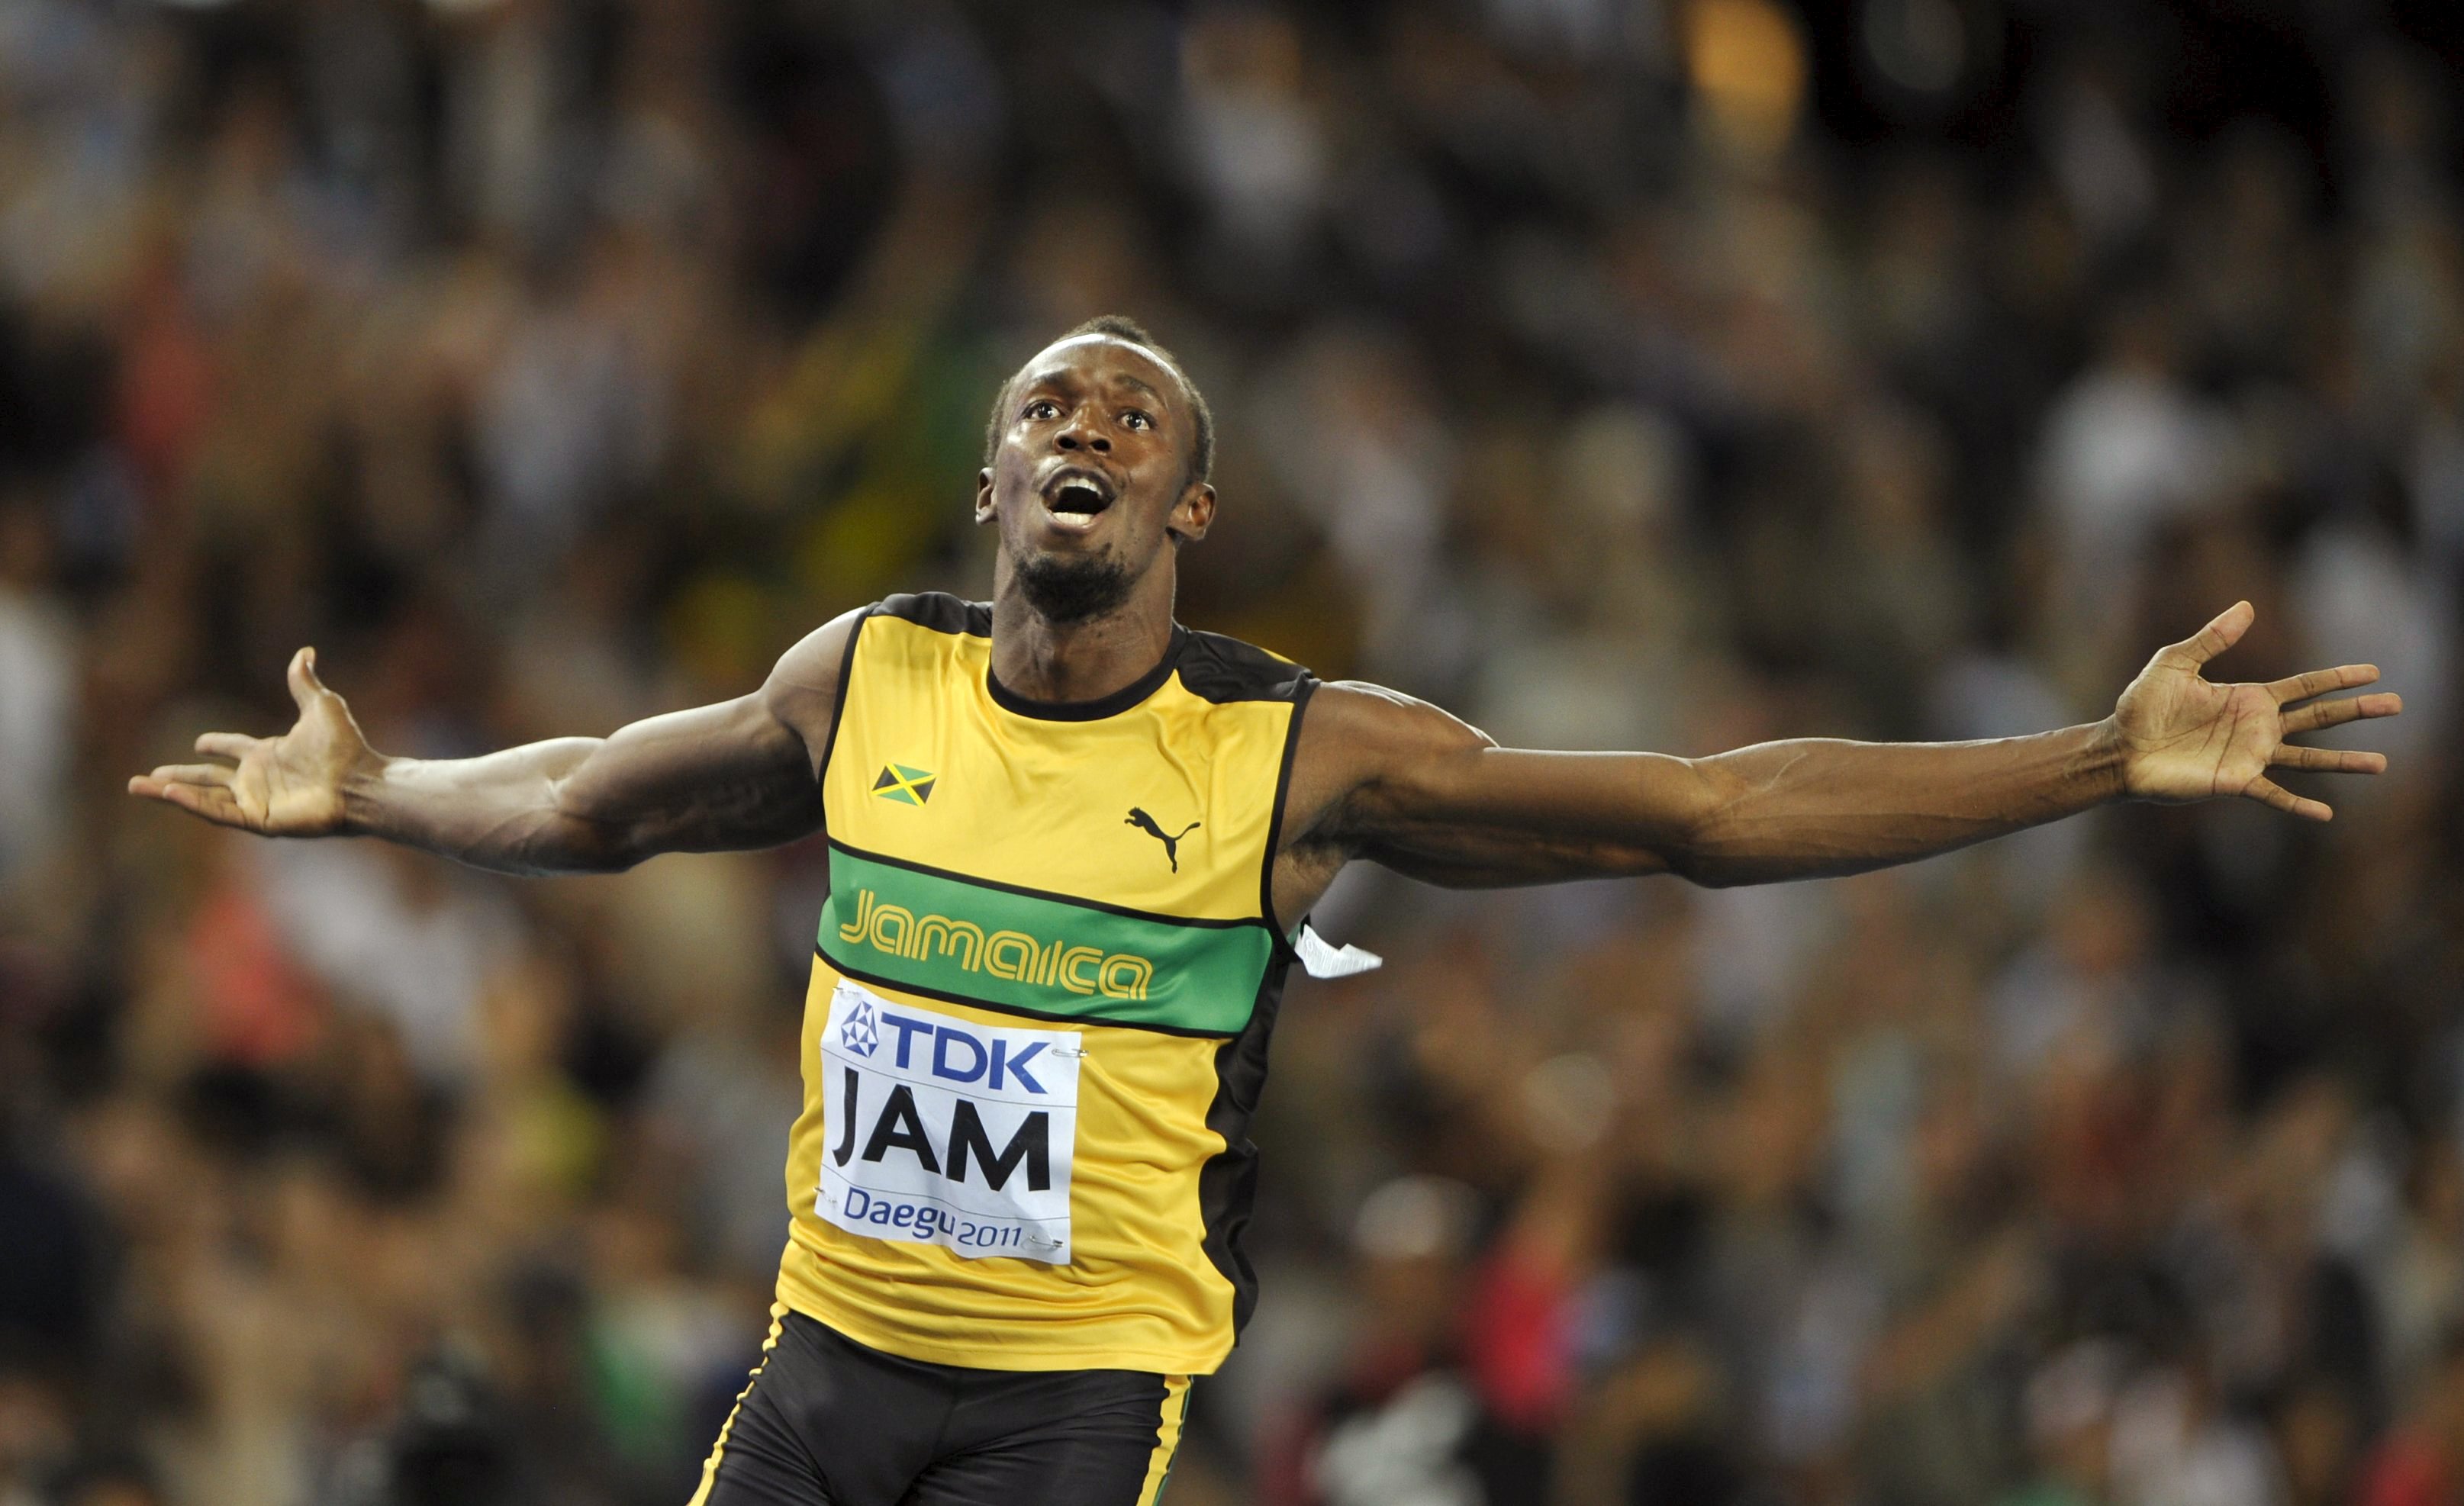 Usain Bolt of Jamaica celebrates winning the men's 4x100 metres relay final at the IAAF World Championships in Daegu in this file picture taken September 4, 2011. Six-times Olympic champion Bolt said he felt shocked and let down by the scandal-hit IAAF, but the Jamaican sprinter was against resetting athletics world records as the sport attempts to move on from the doping crisis. REUTERS/Dylan Martinez/Files